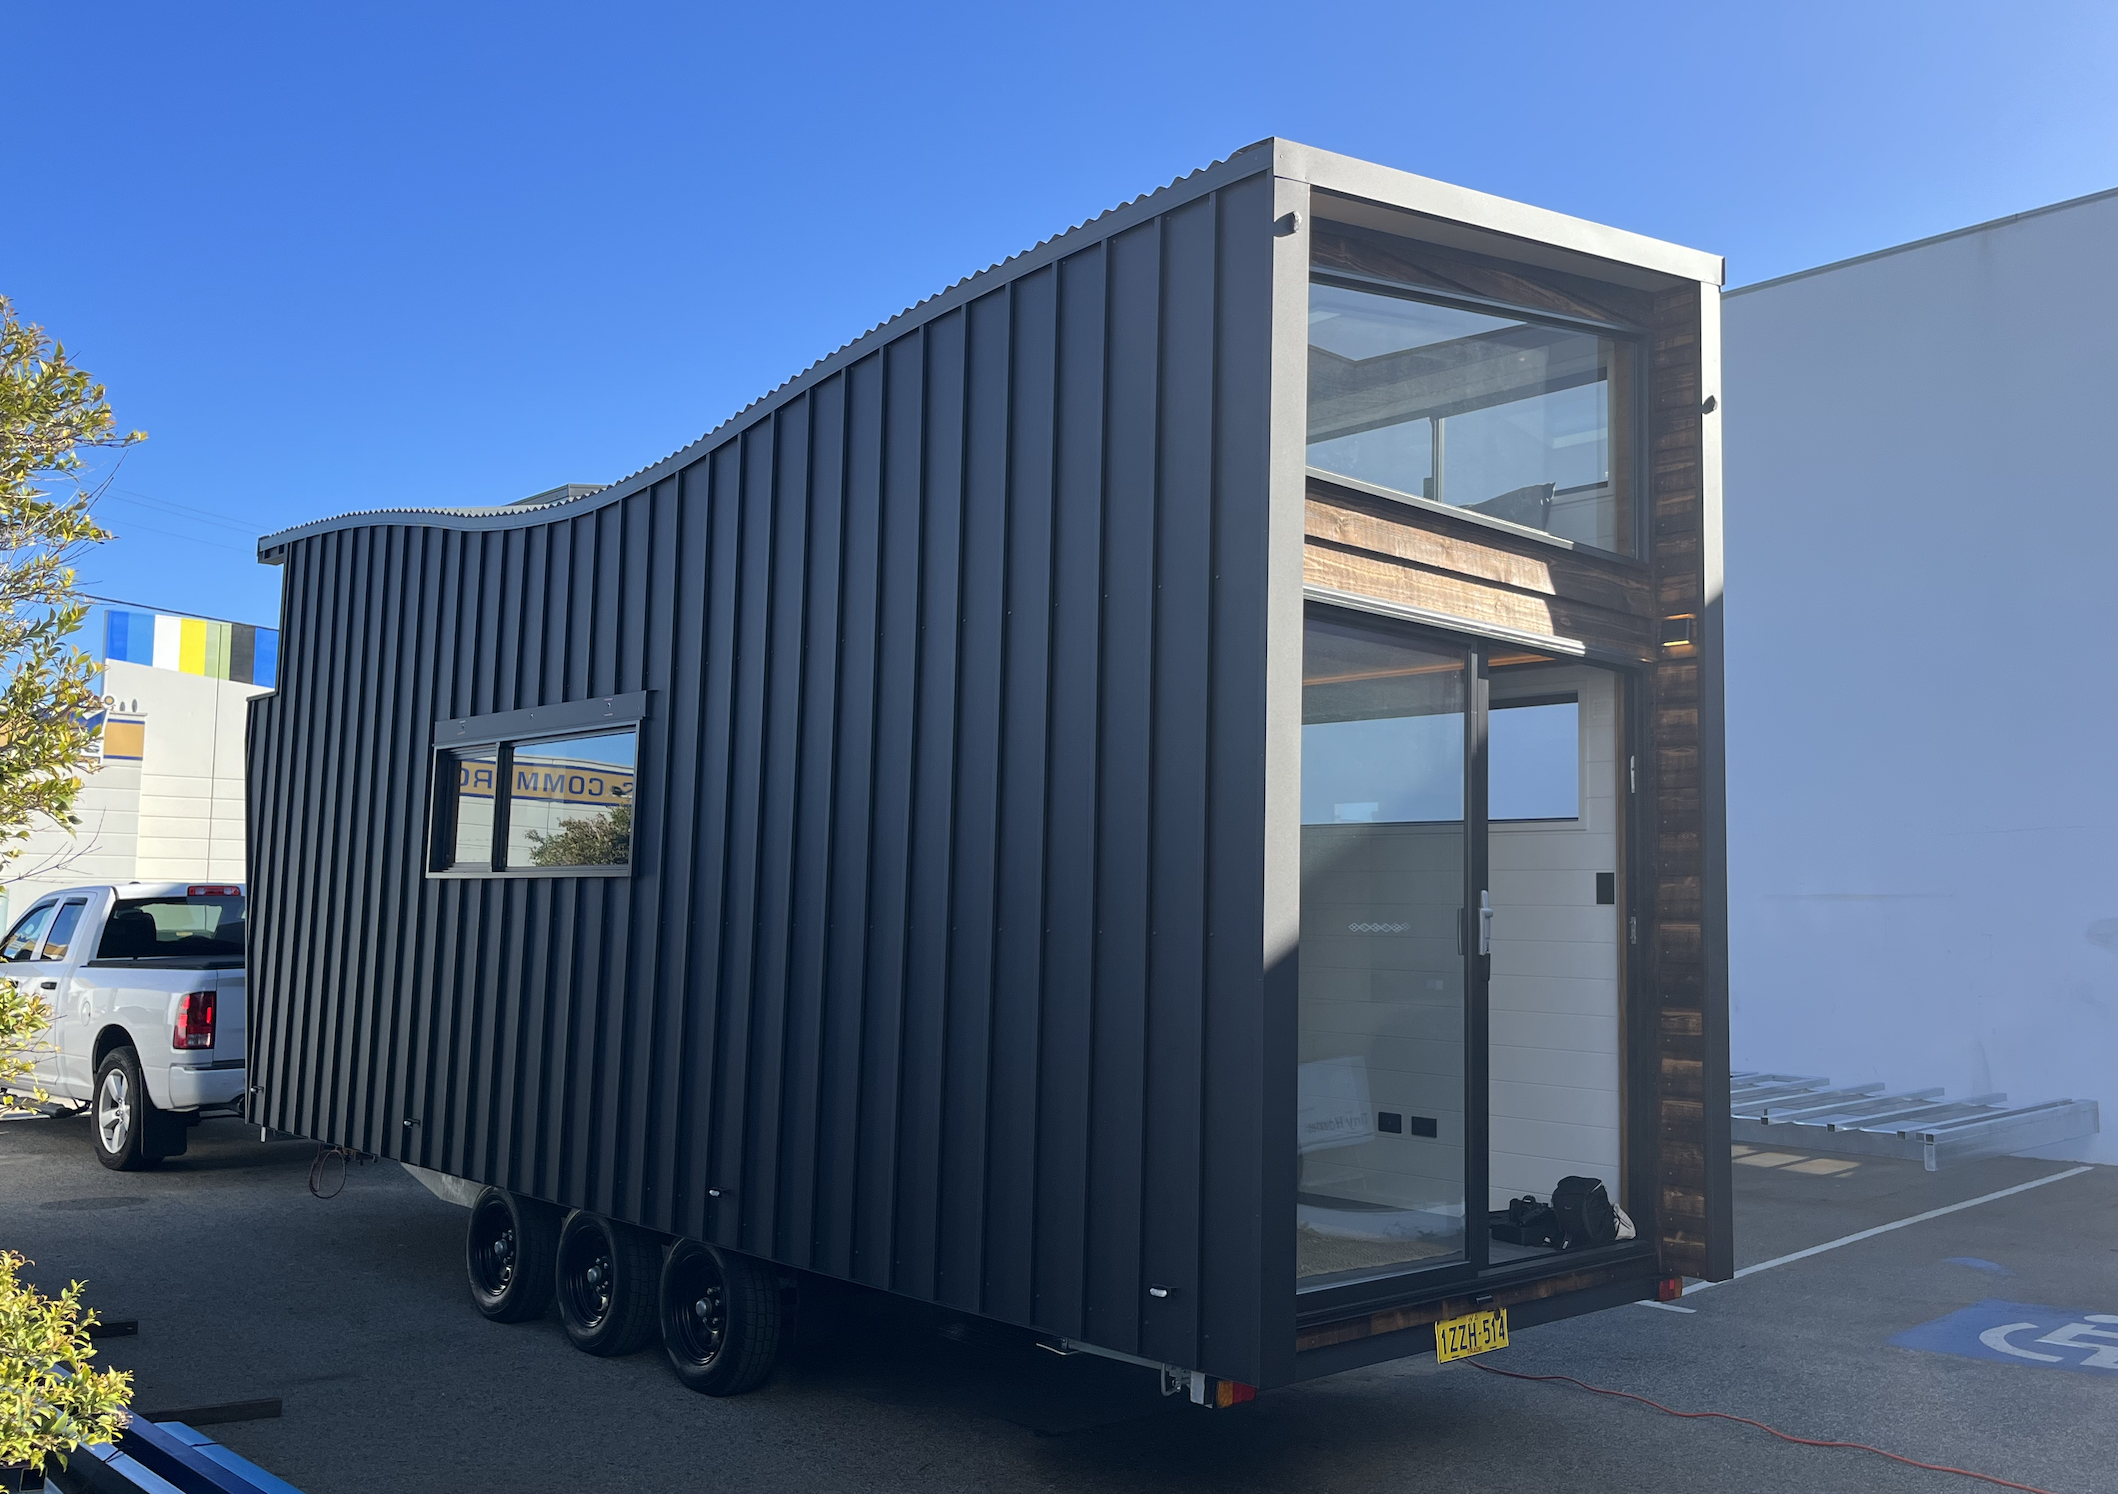 Tiny Homes Perth new display home